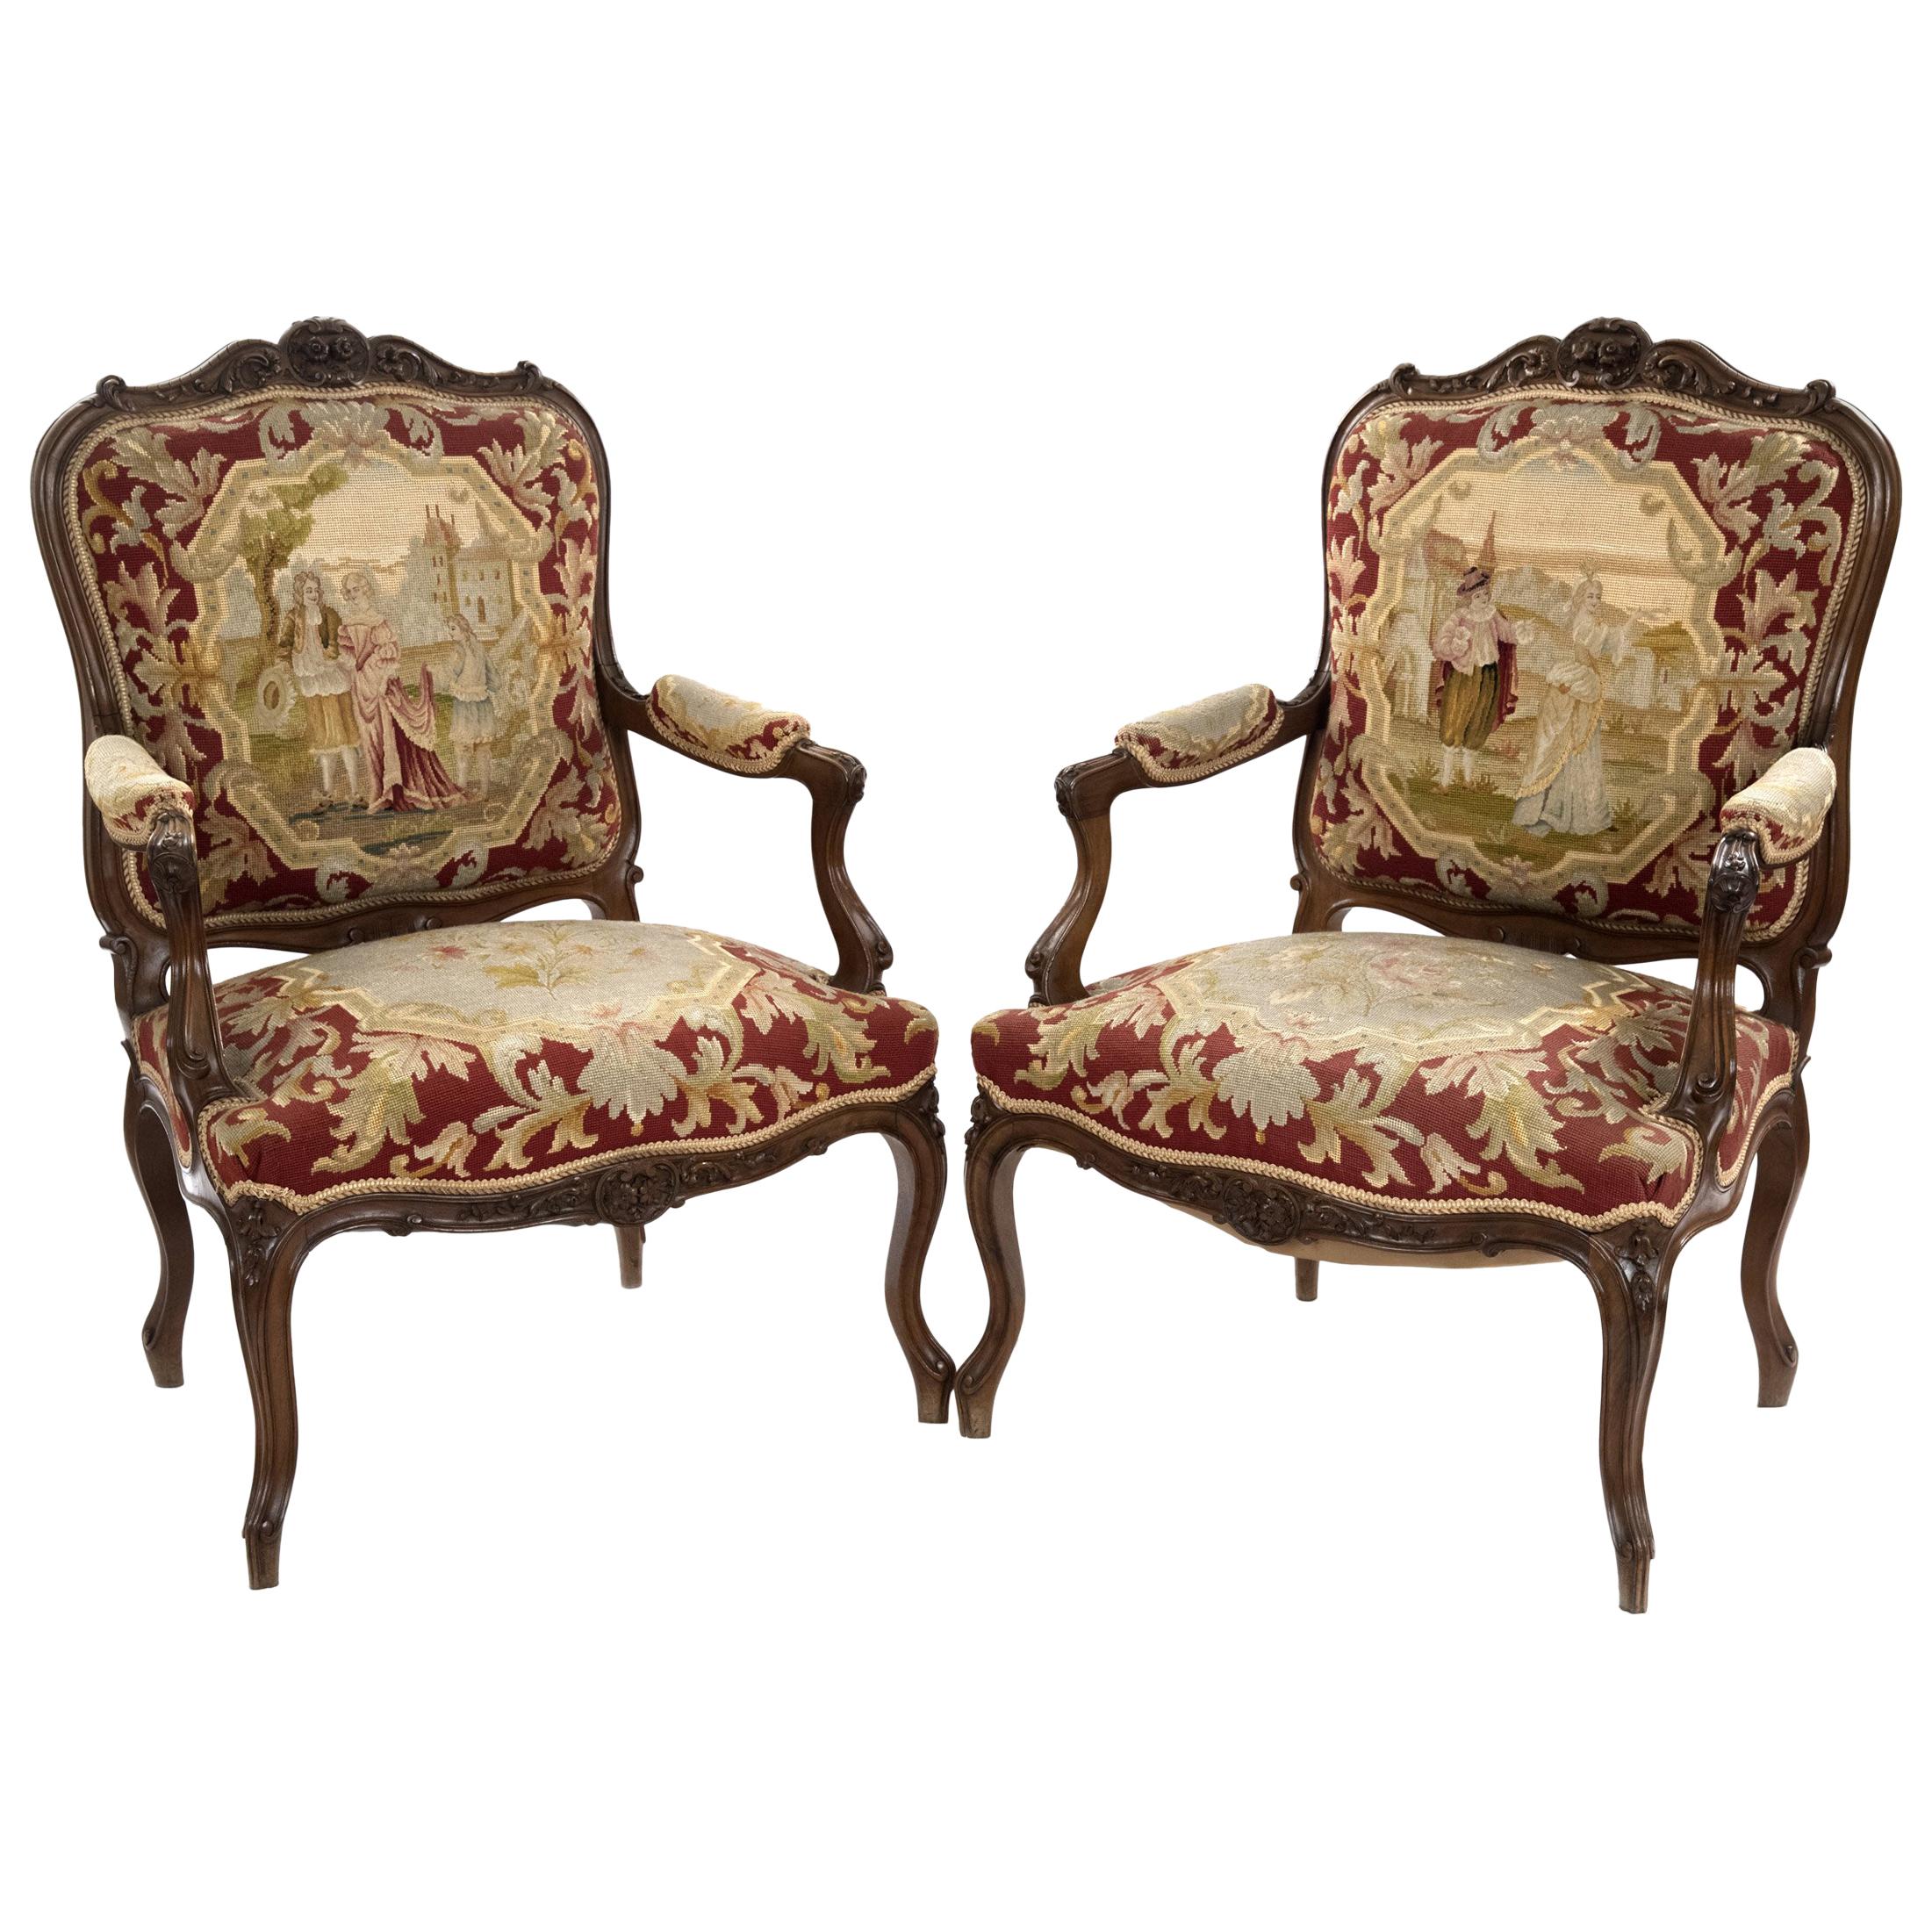 Pair of Louis XV Style Carved Walnut Tapestry Armchairs